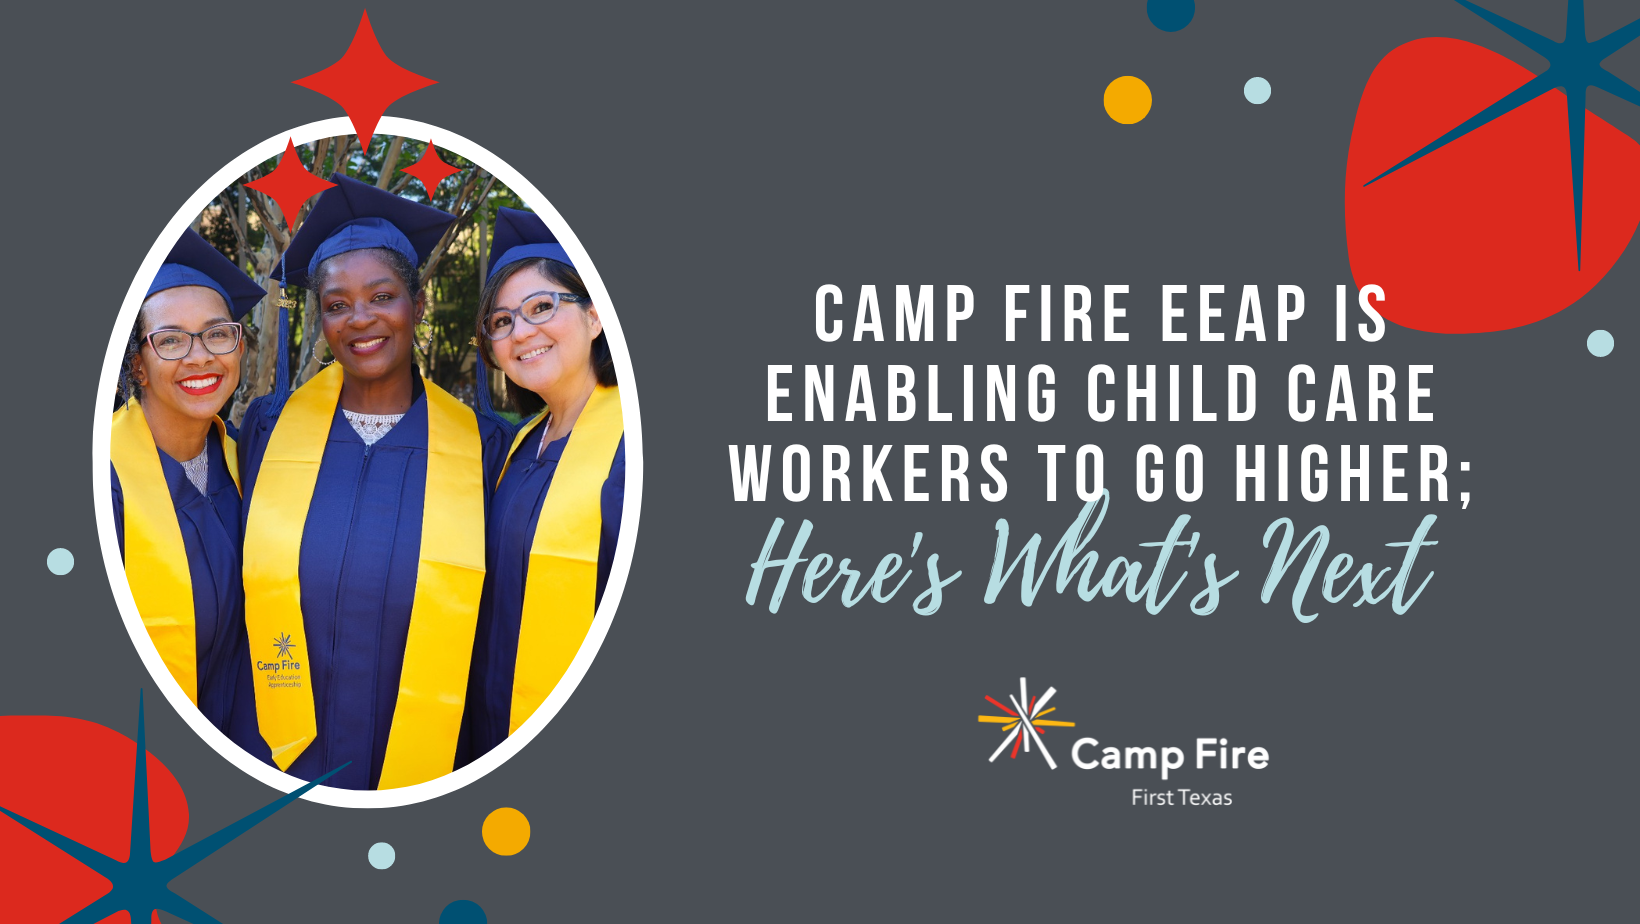 Camp Fire Early Education Apprenticeship Program is Enabling Child Care Workers to Go Higher; Here's What's Next, a Camp Fire First Texas blog by Yolanda Willis